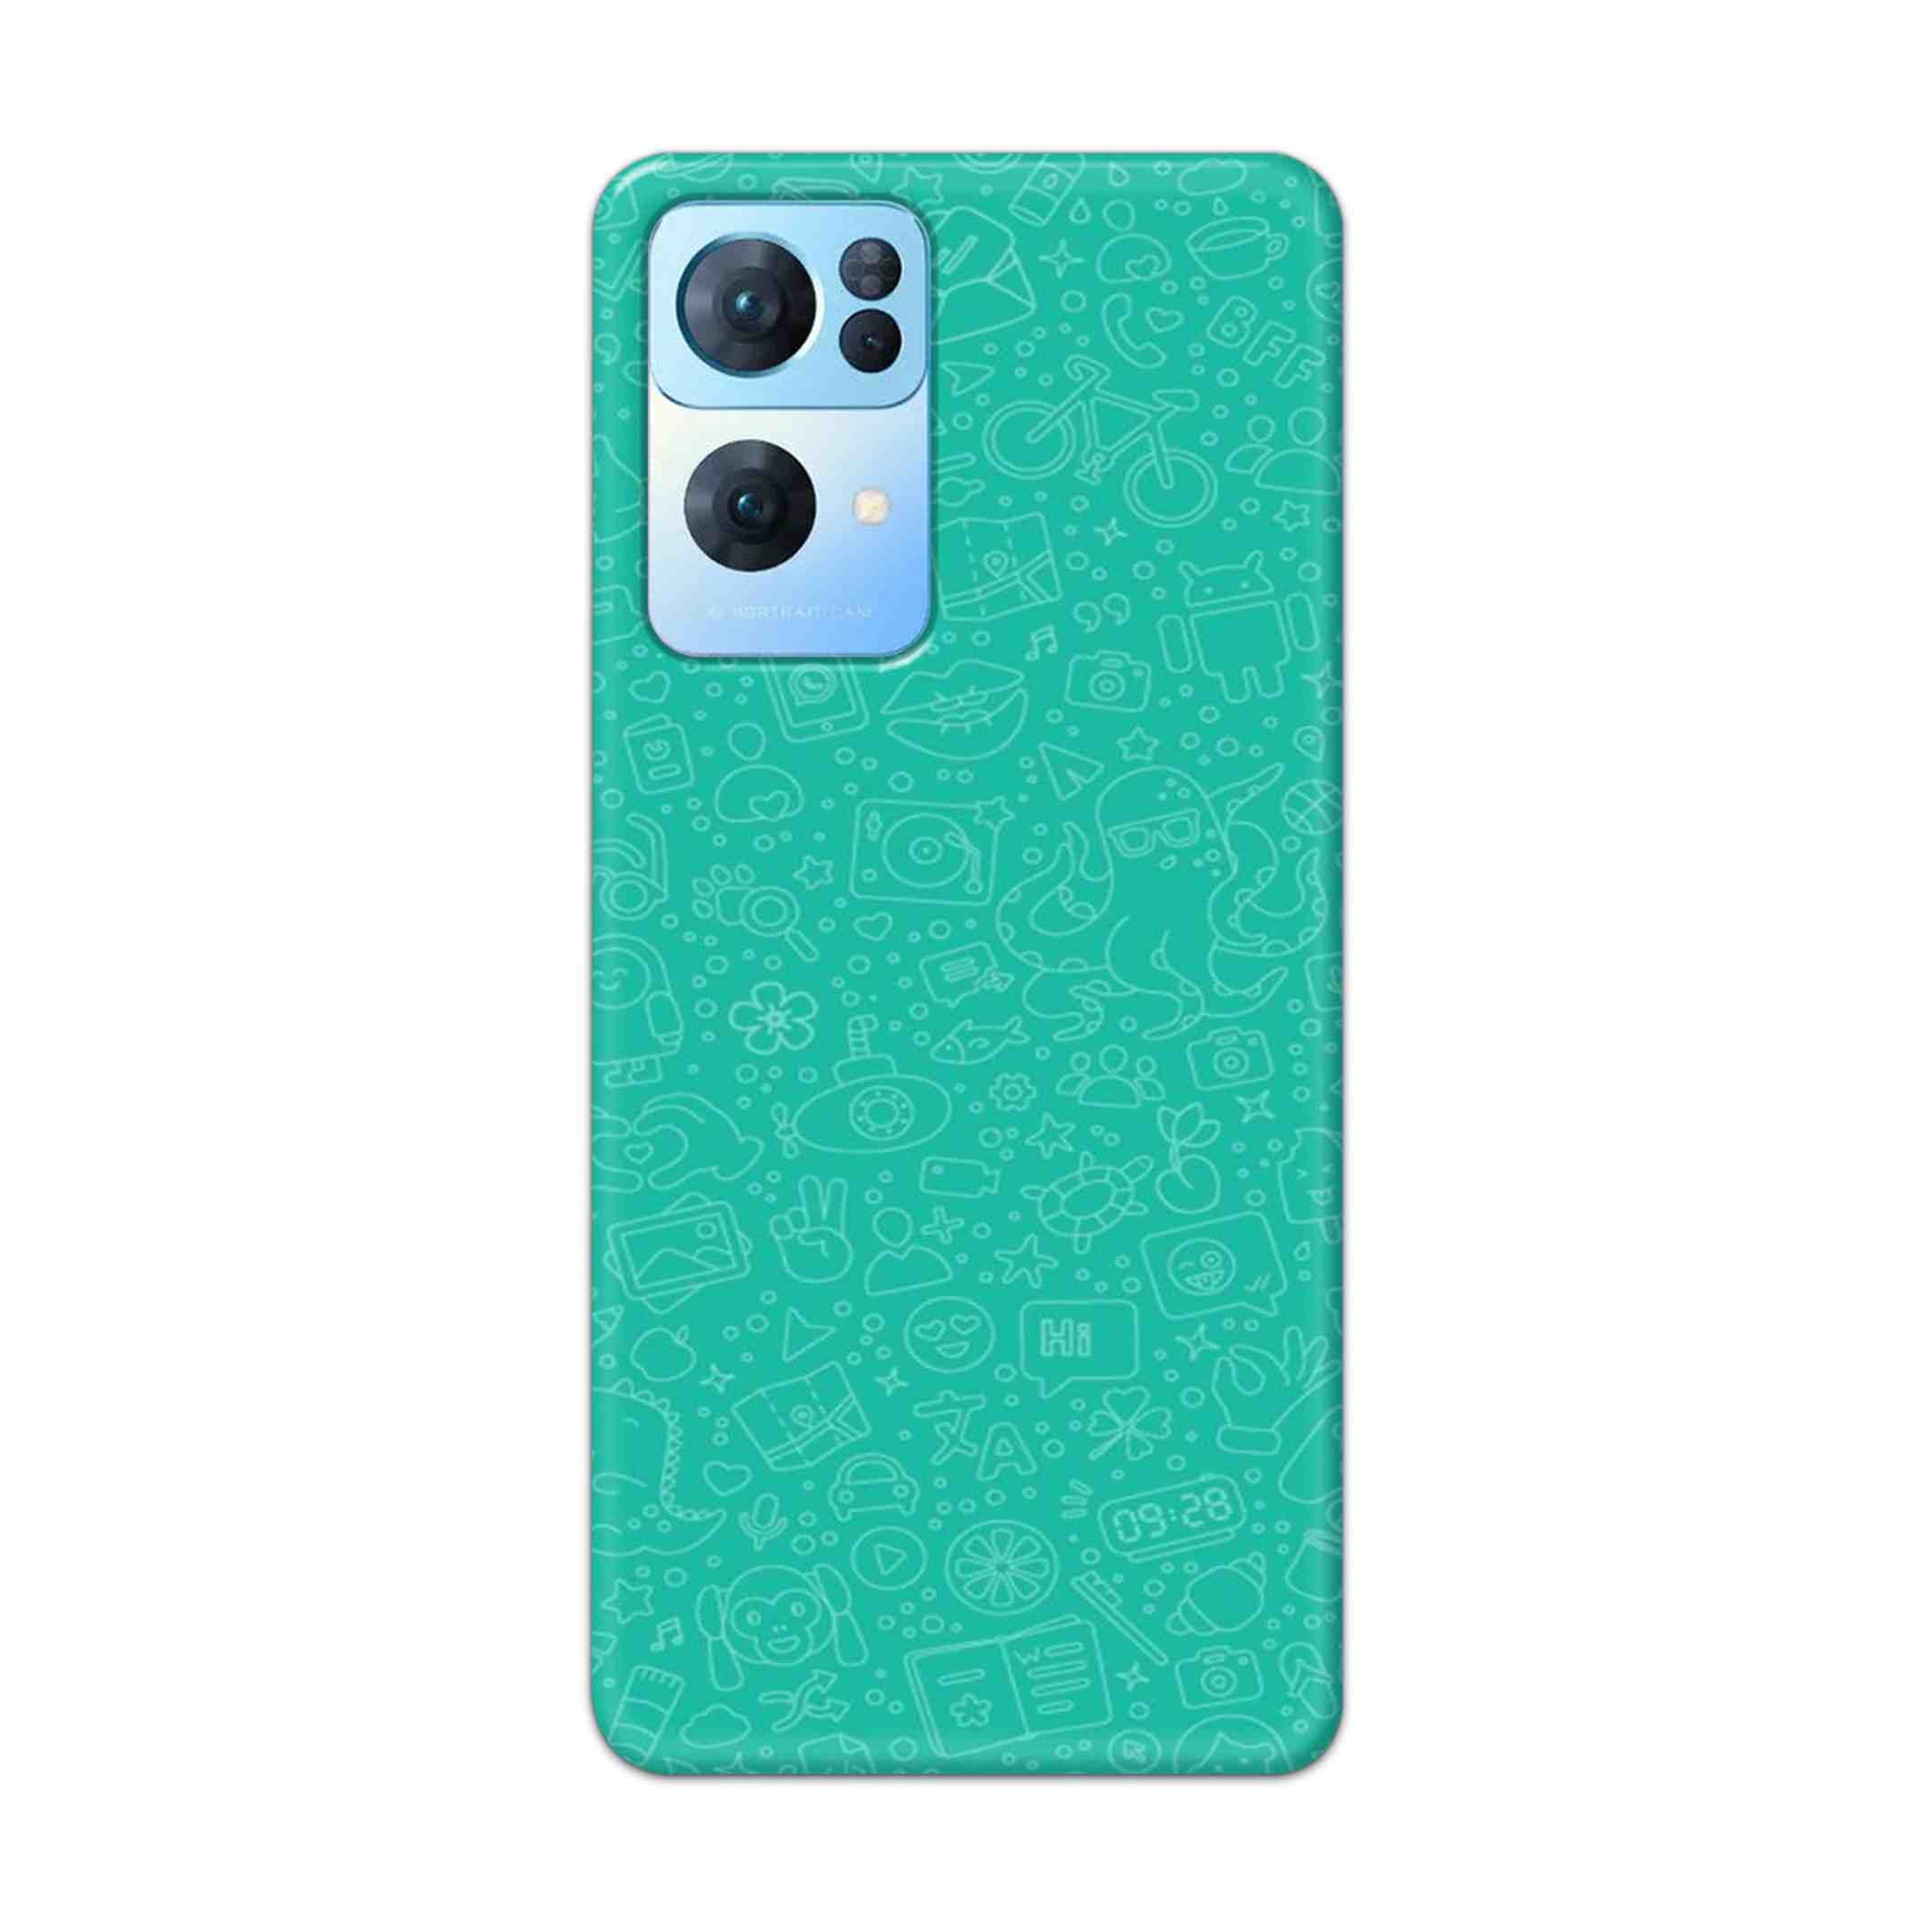 Buy Whatsapp Hard Back Mobile Phone Case Cover For Oppo Reno 7 Pro Online